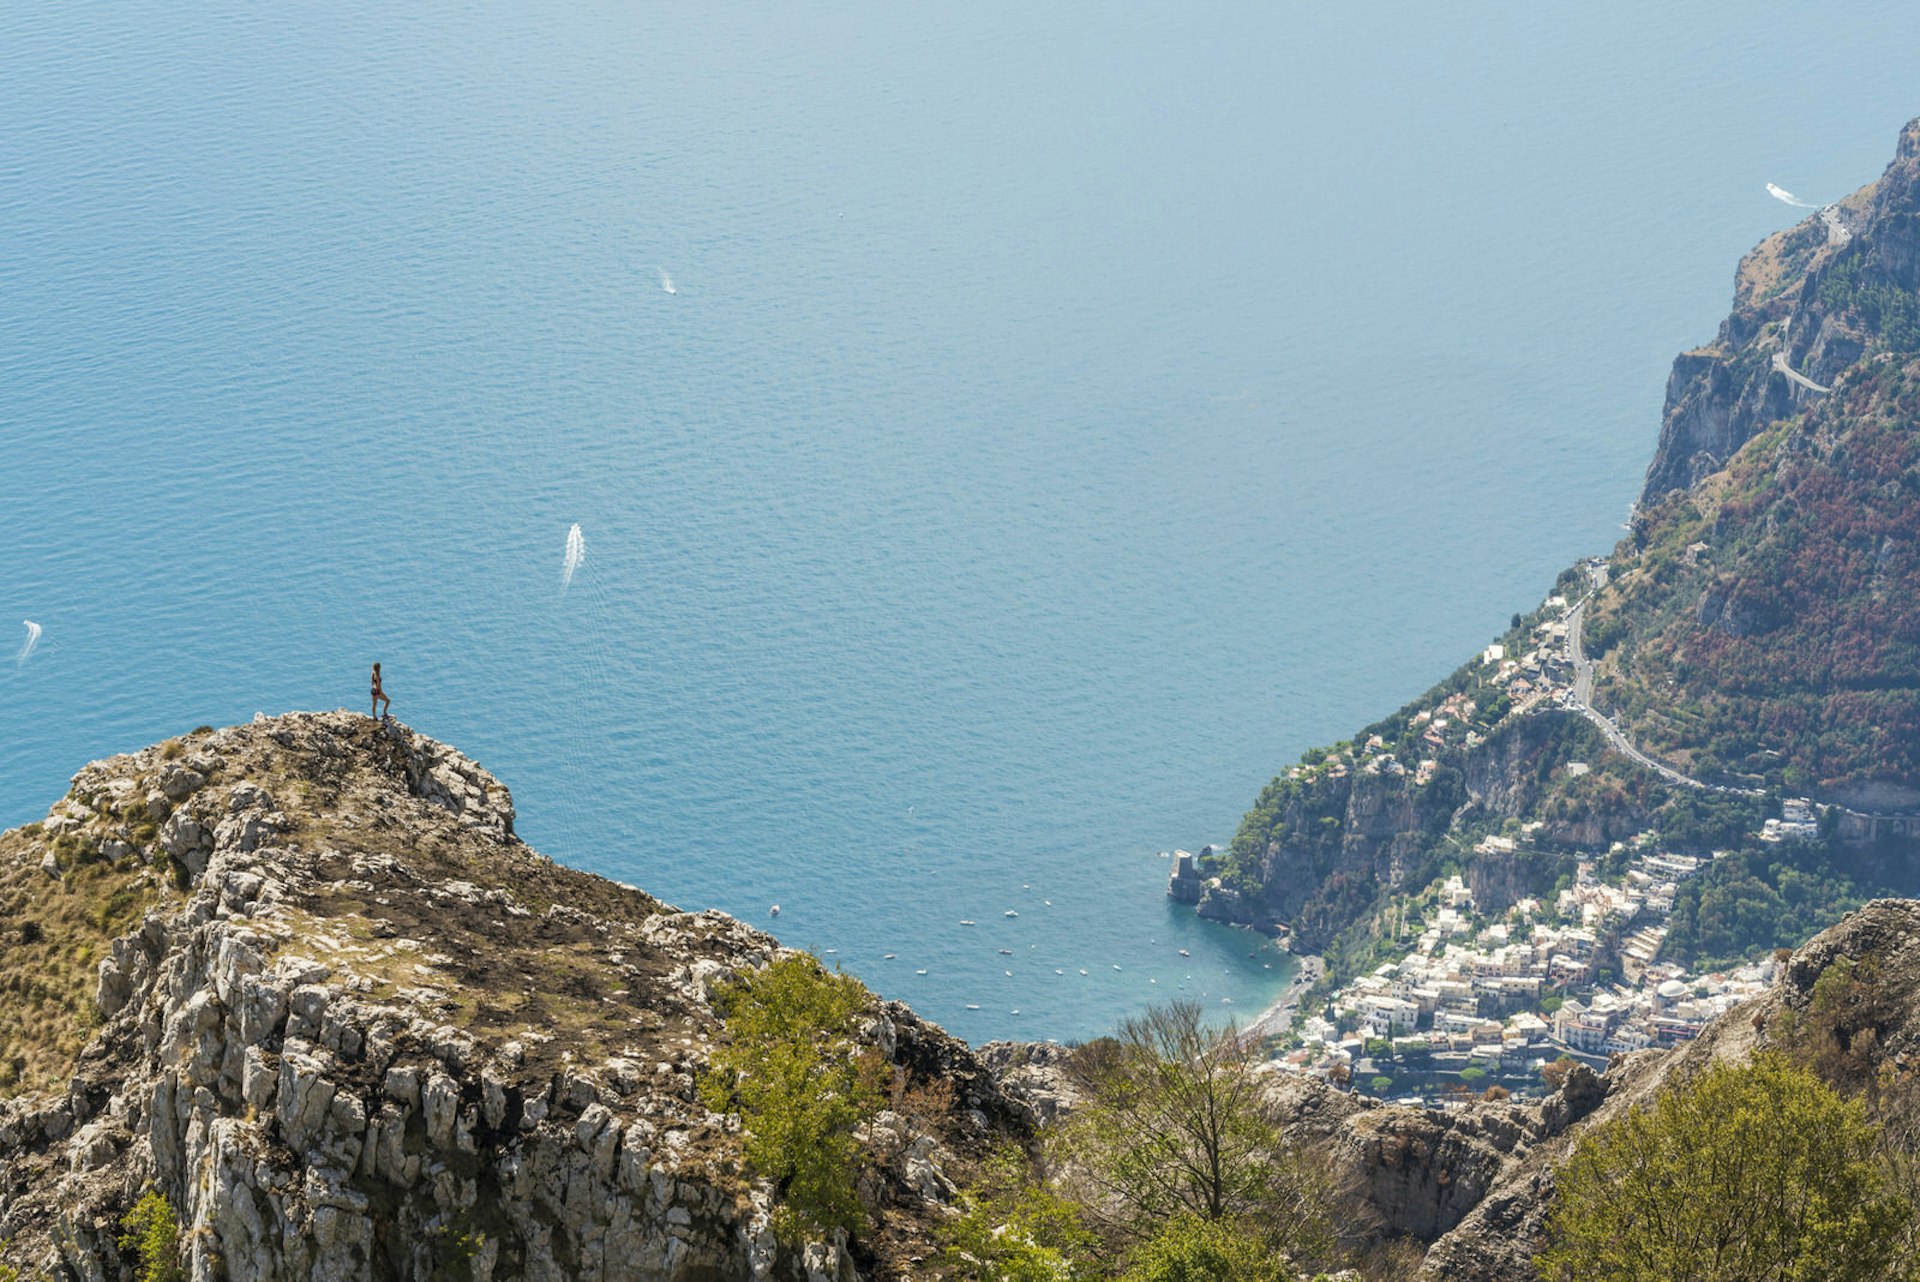 A hiker stands on a rocky promontory, looking down on a distant pastel-housed village with the sea below